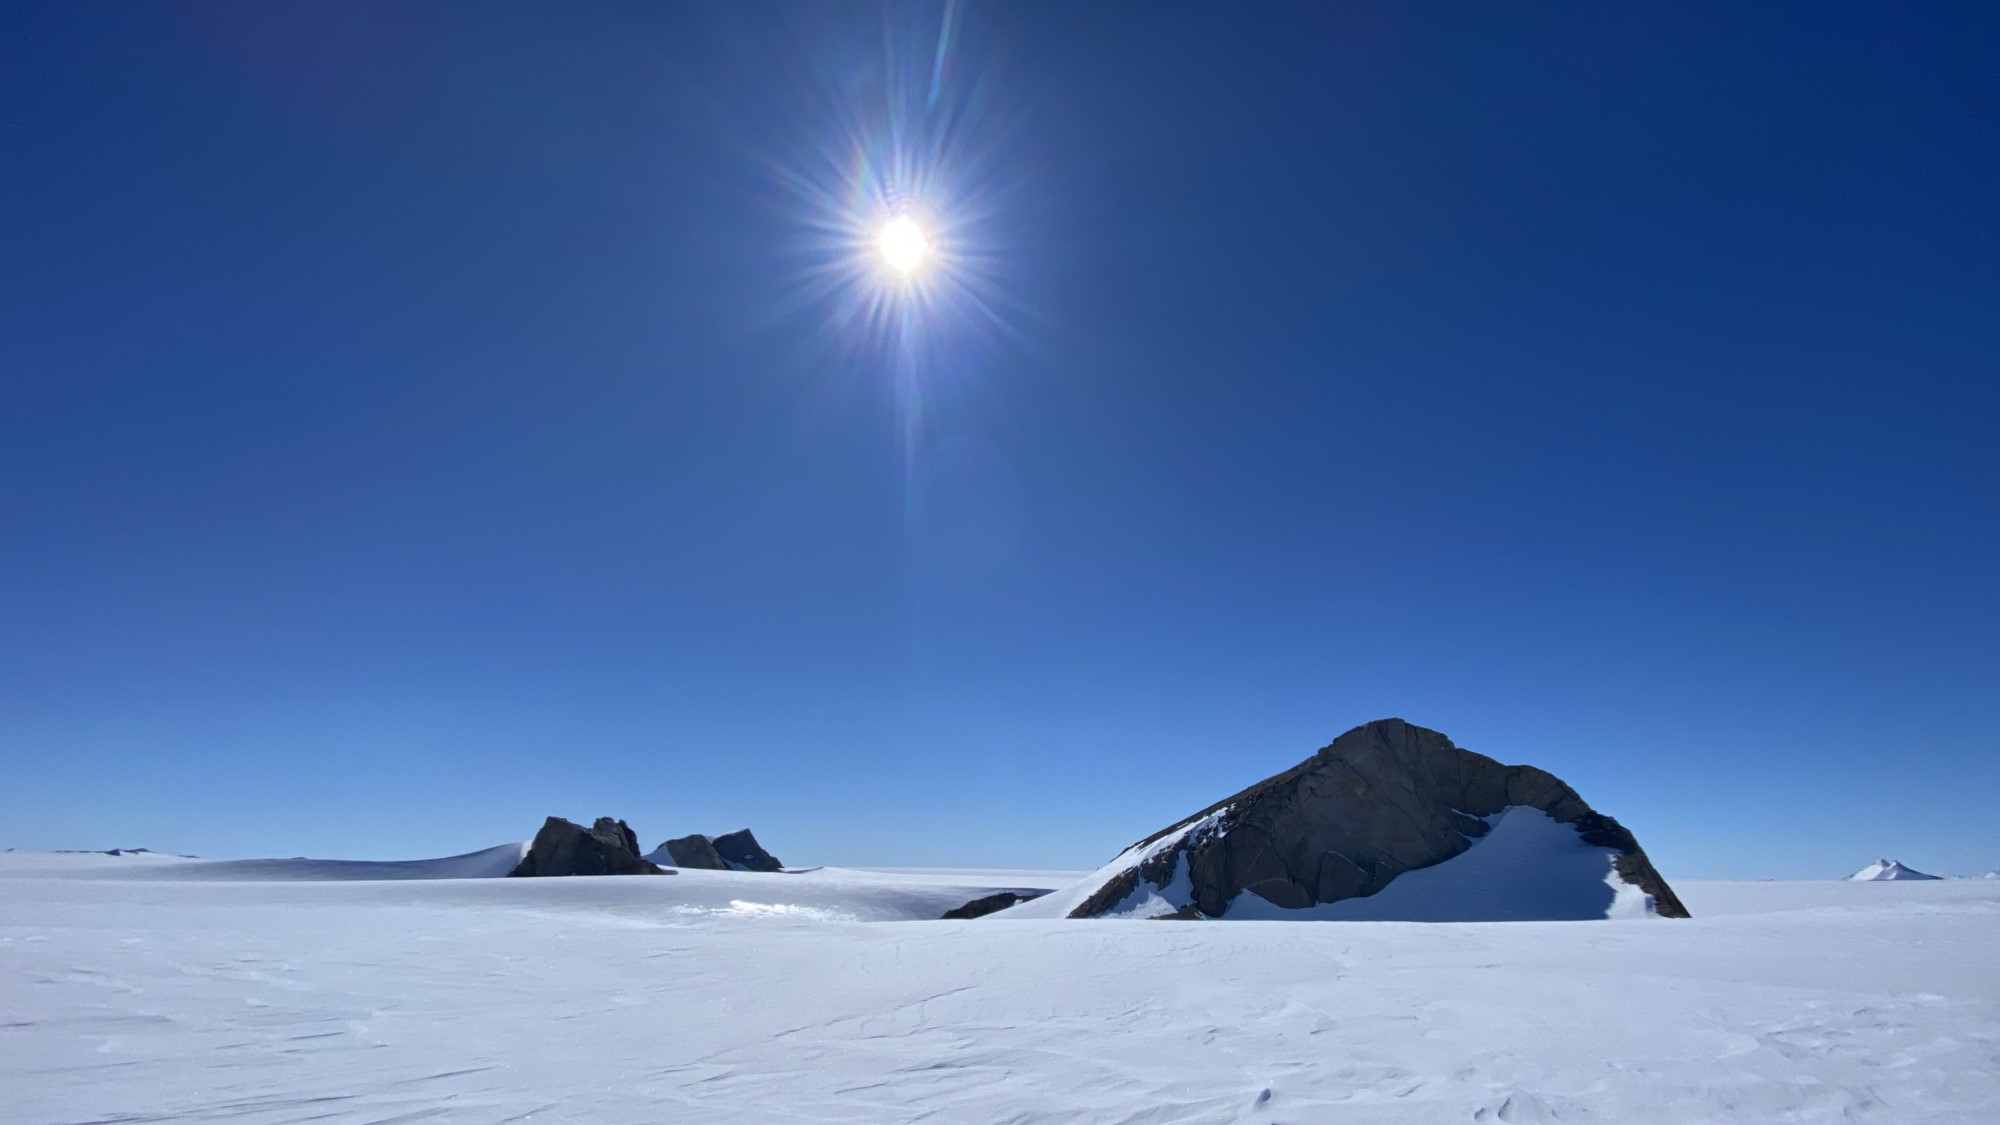 The snowy landscape of Antarctica where five meteorites have been recovered, including a rare 17-pound monster.